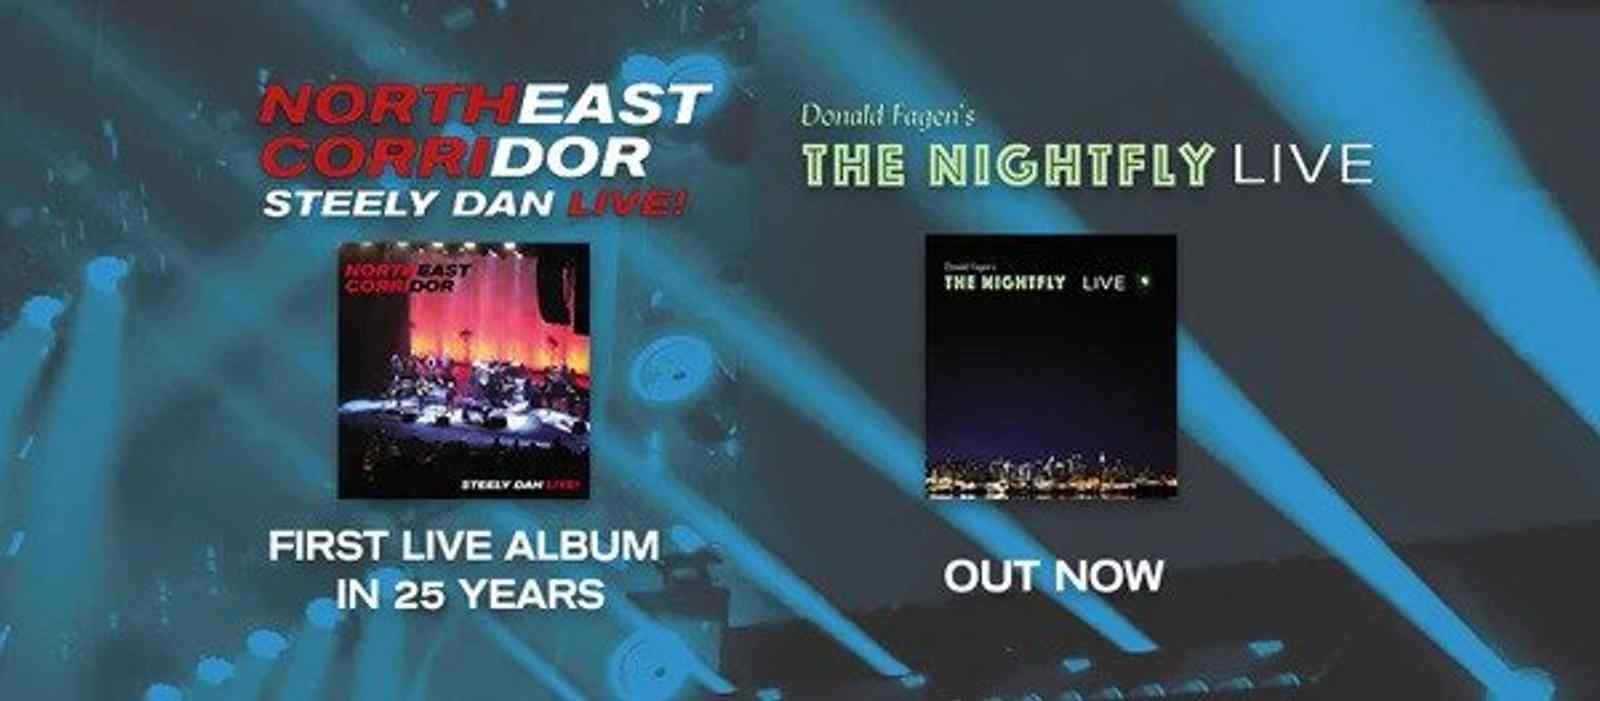 Northeast Corridor: Steely Dan Live! & Donald Fagen's The Nightfly Live Out Now